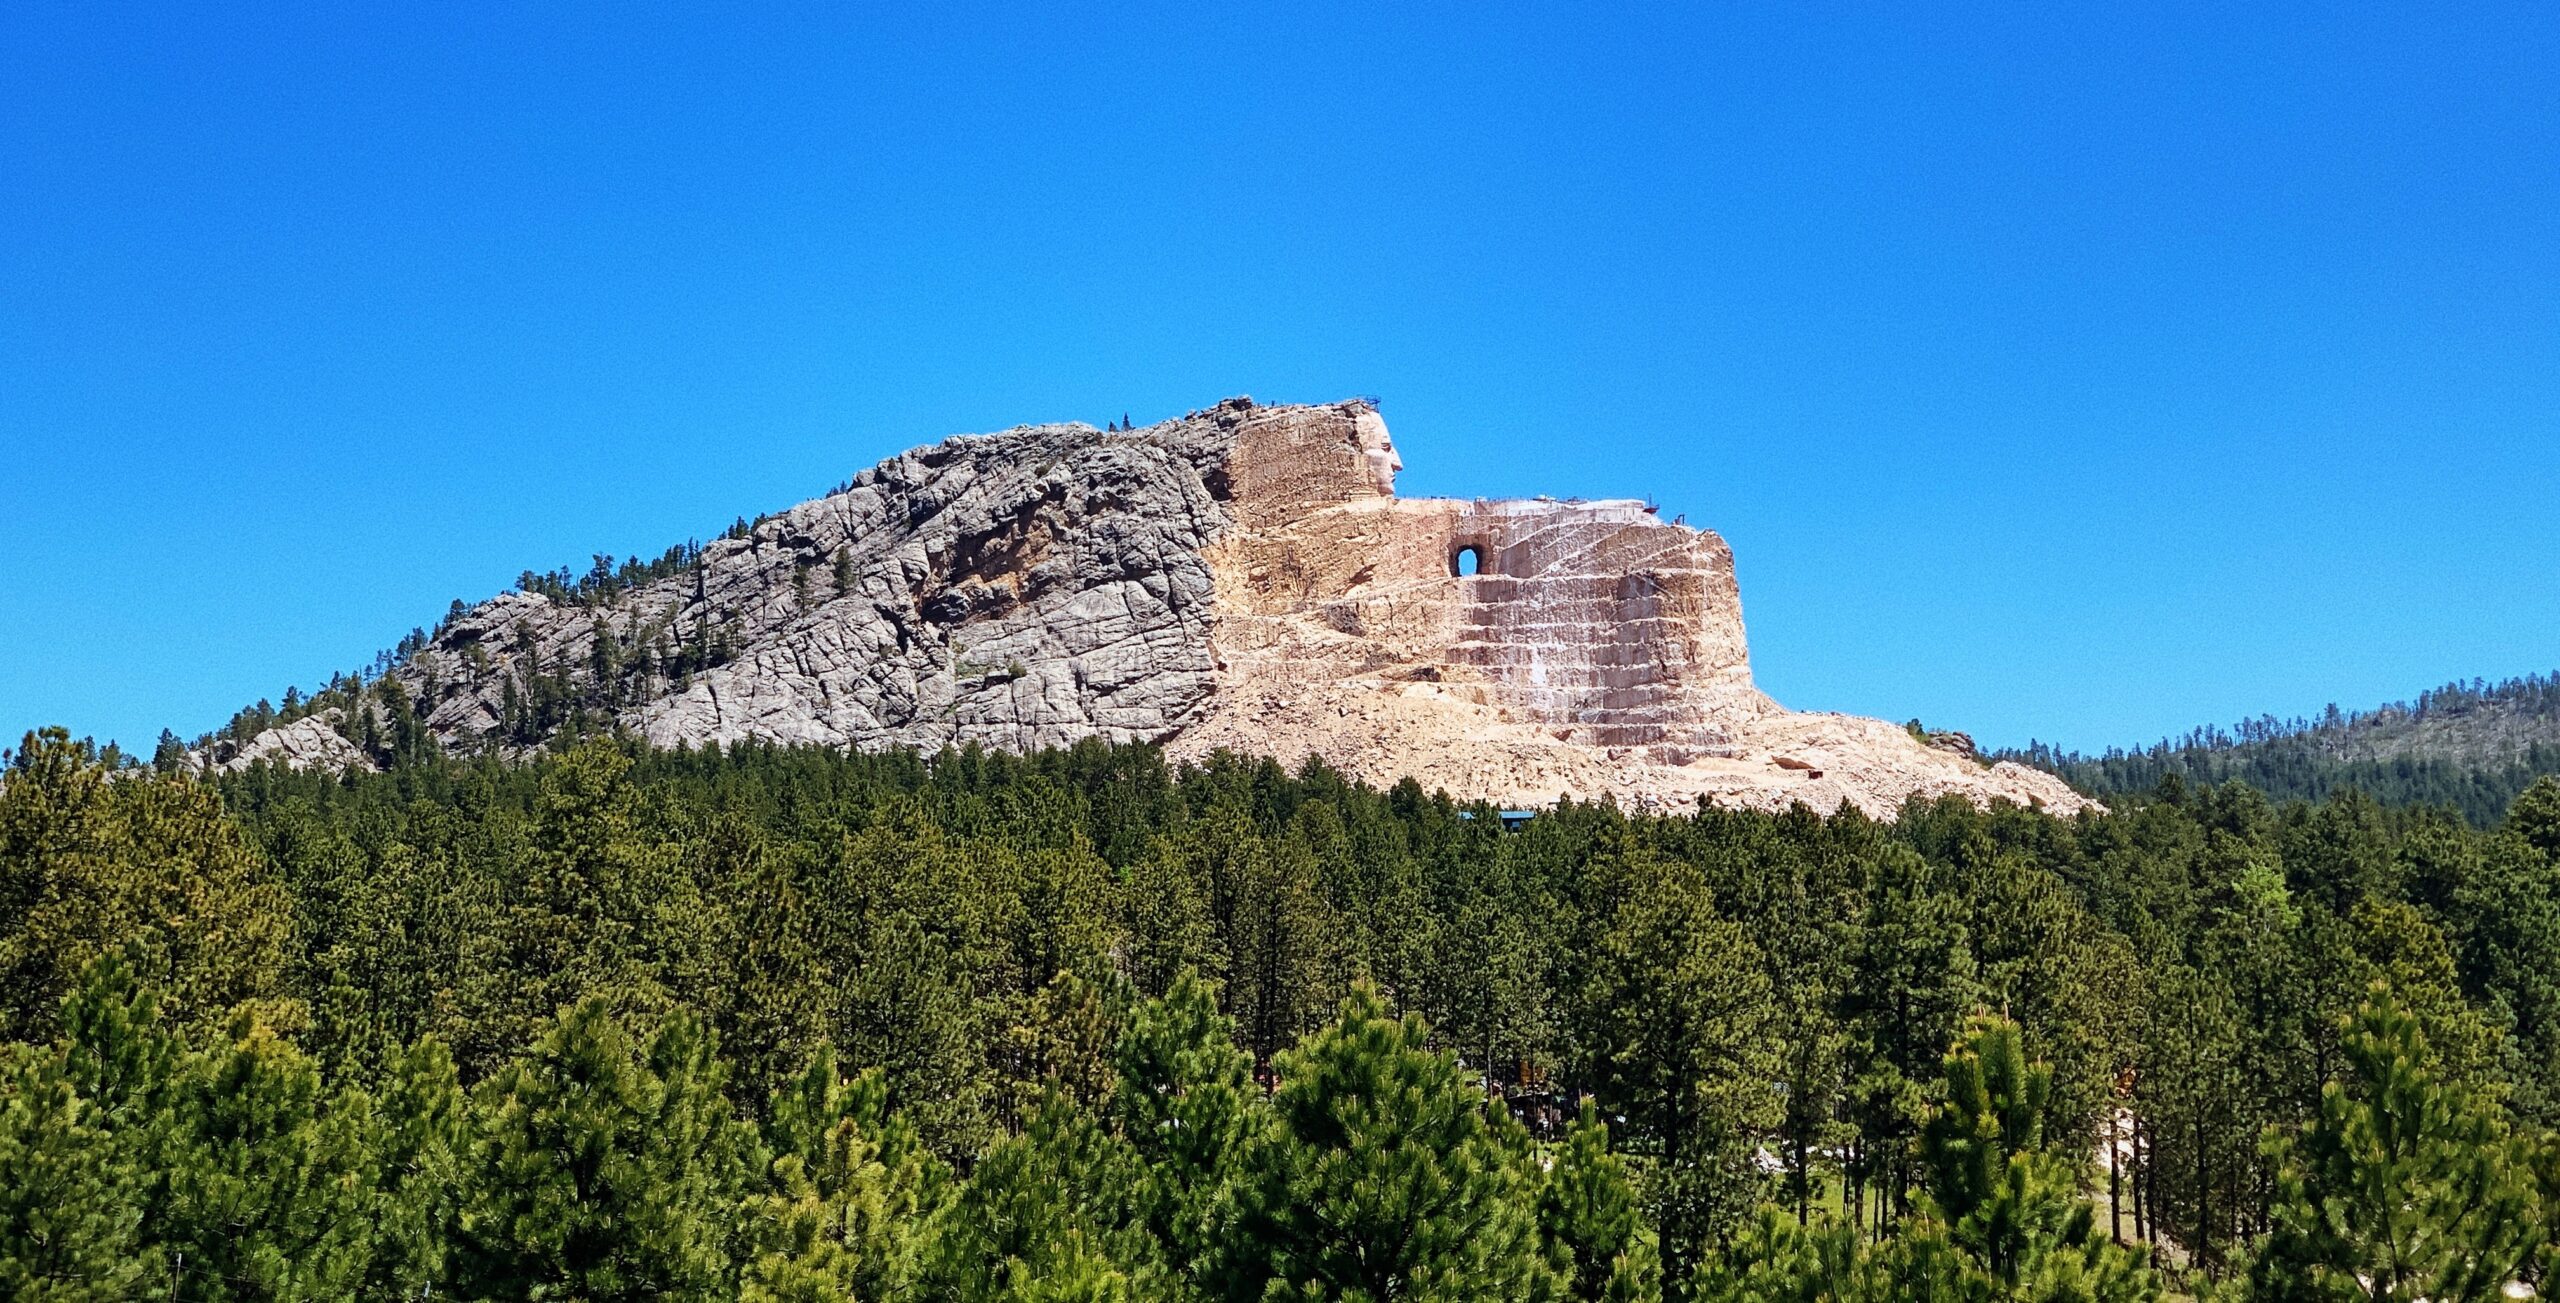 Image of Crazy Horse memorial, white coloured rock against a bright blue sky with dense green forest in the foreground.